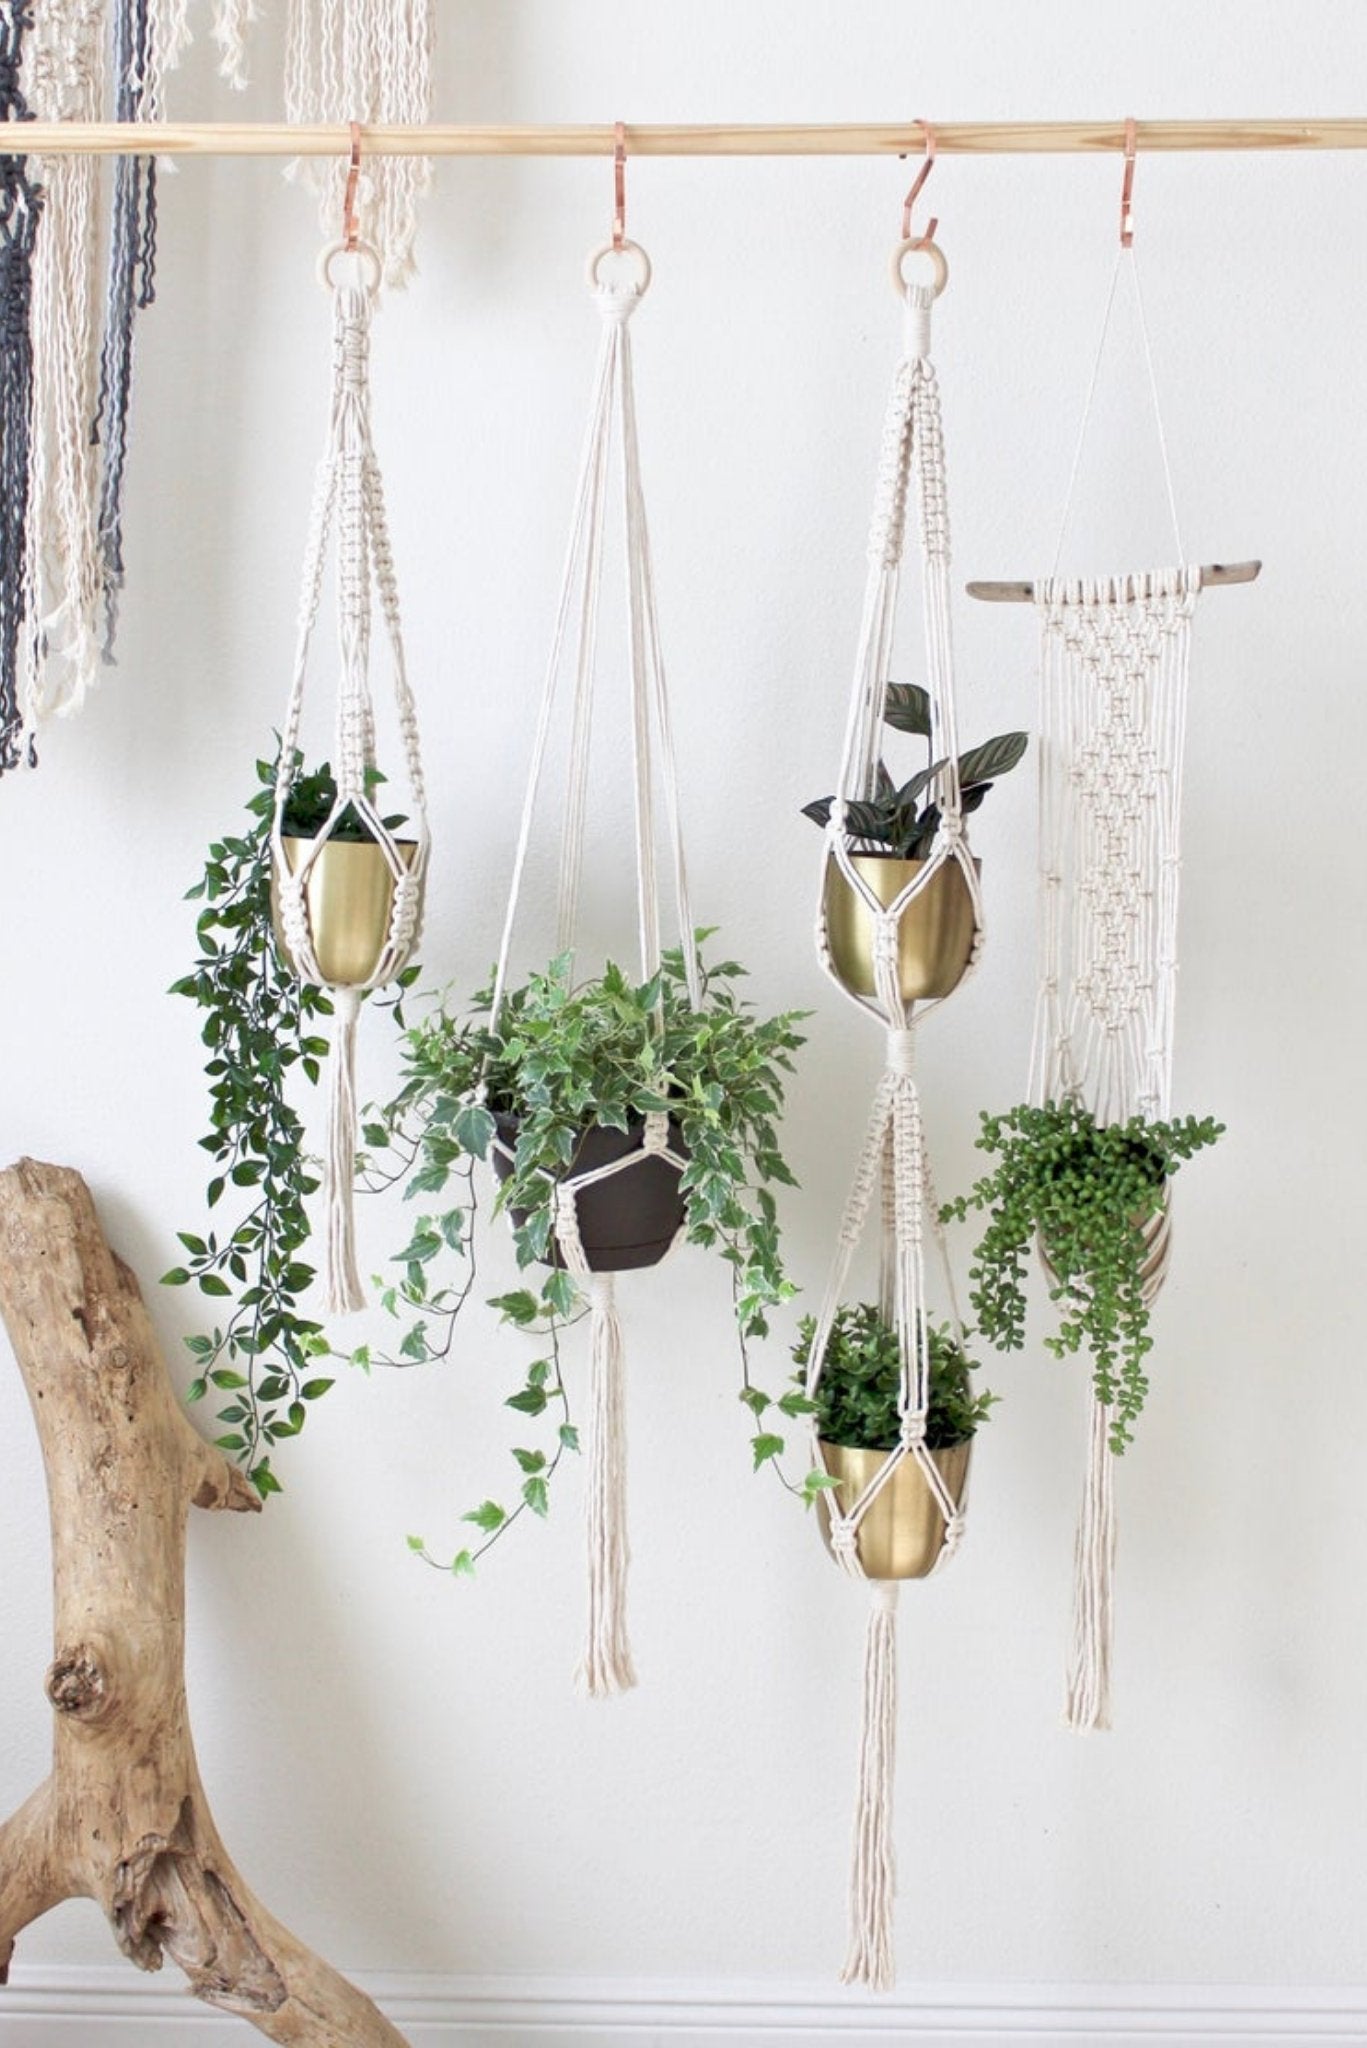 Attractive Plant Gift Ideas that are aesthetically pleasing